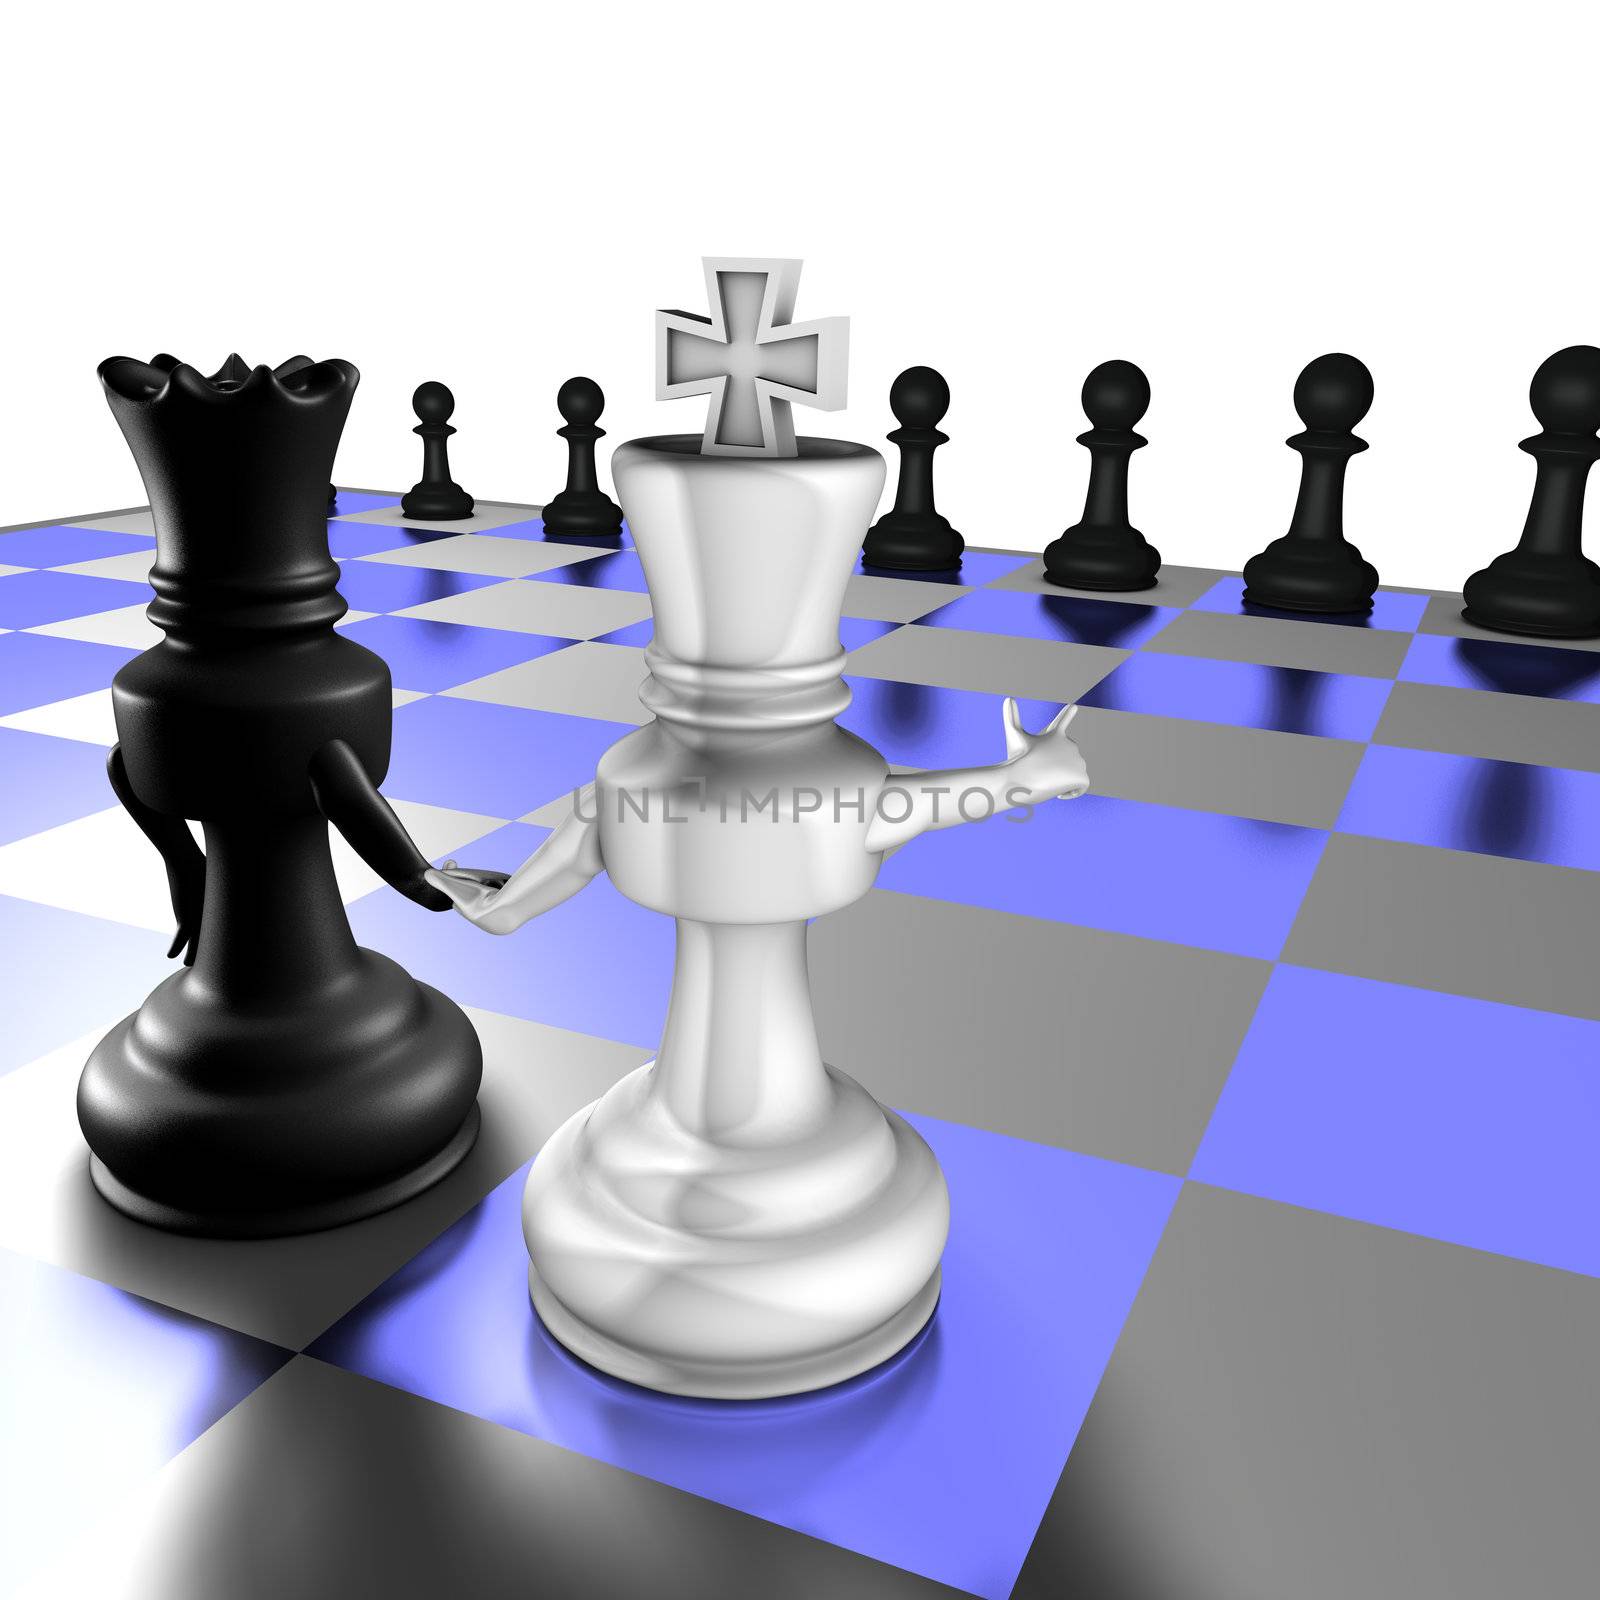 The king shows/selects the pawns